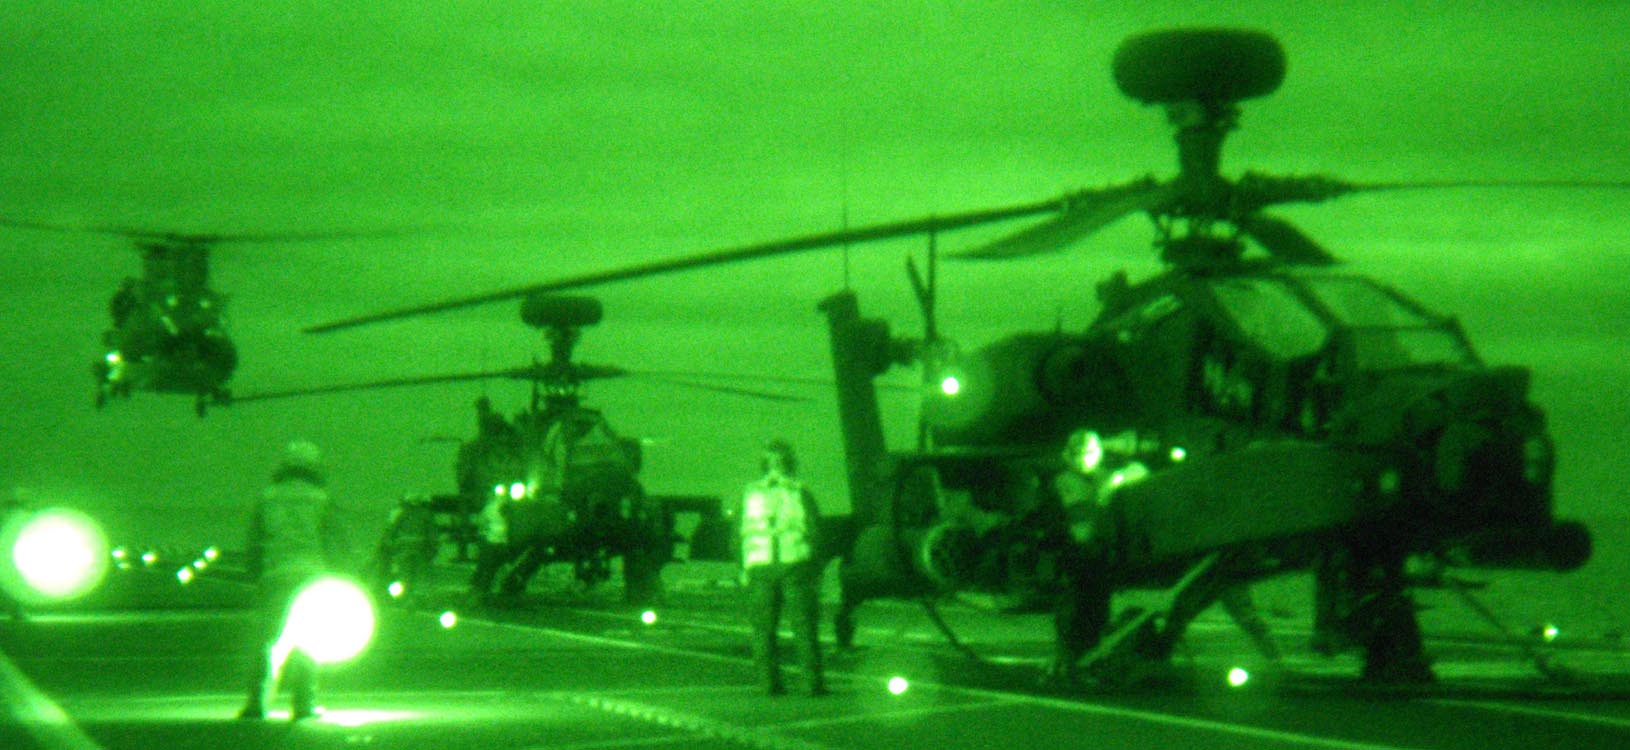 Helicopters With Night Vision